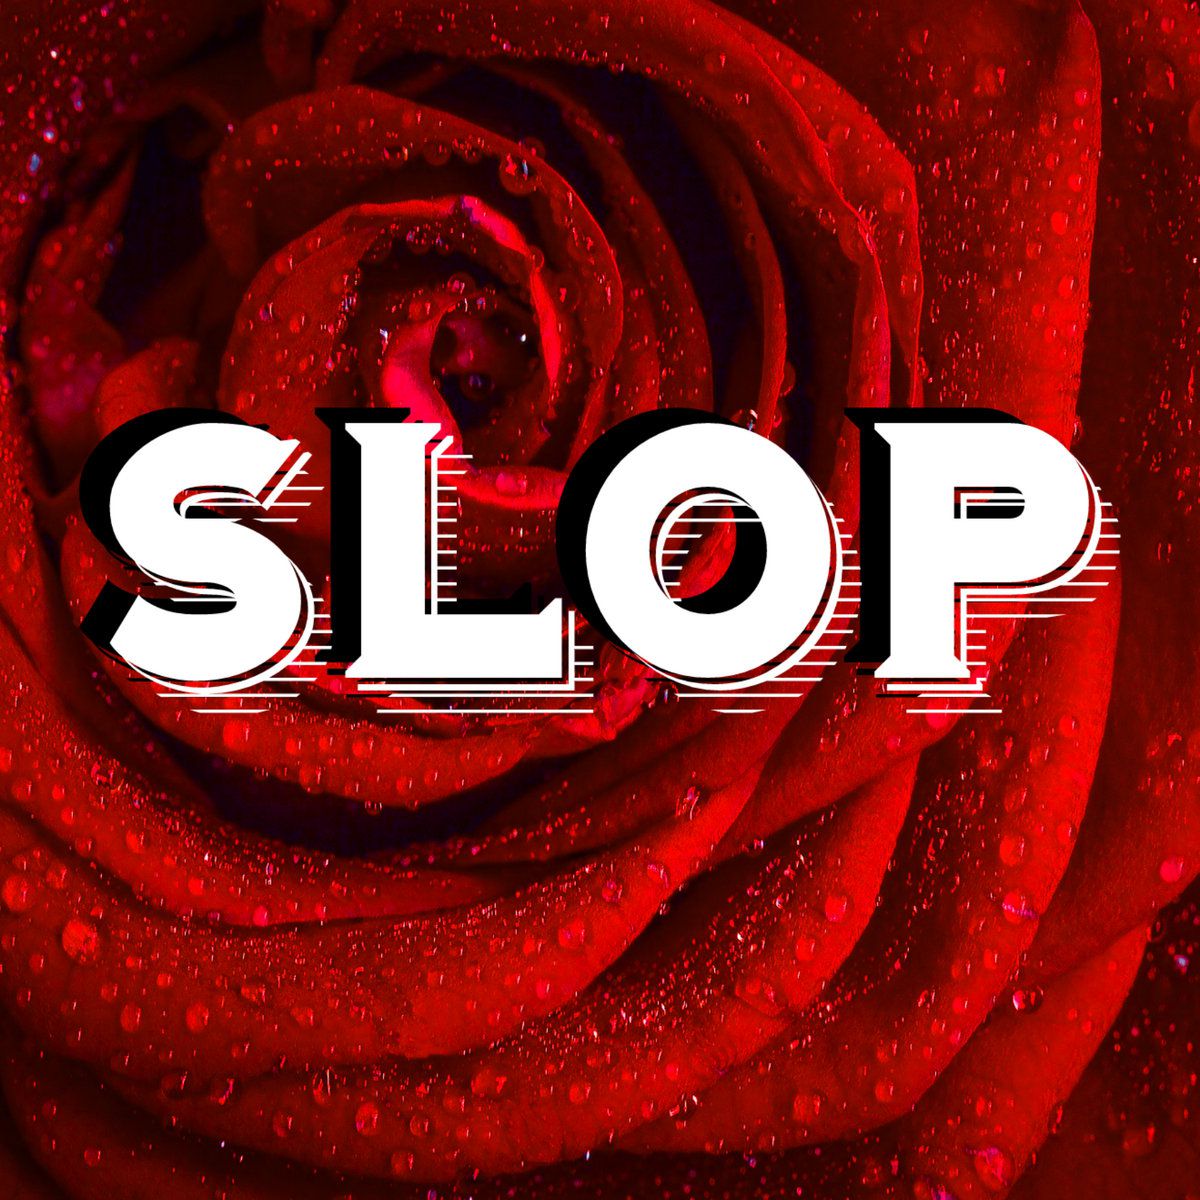 'Slop' from Australian band Horse Meat! is so authentic and deserves a listen